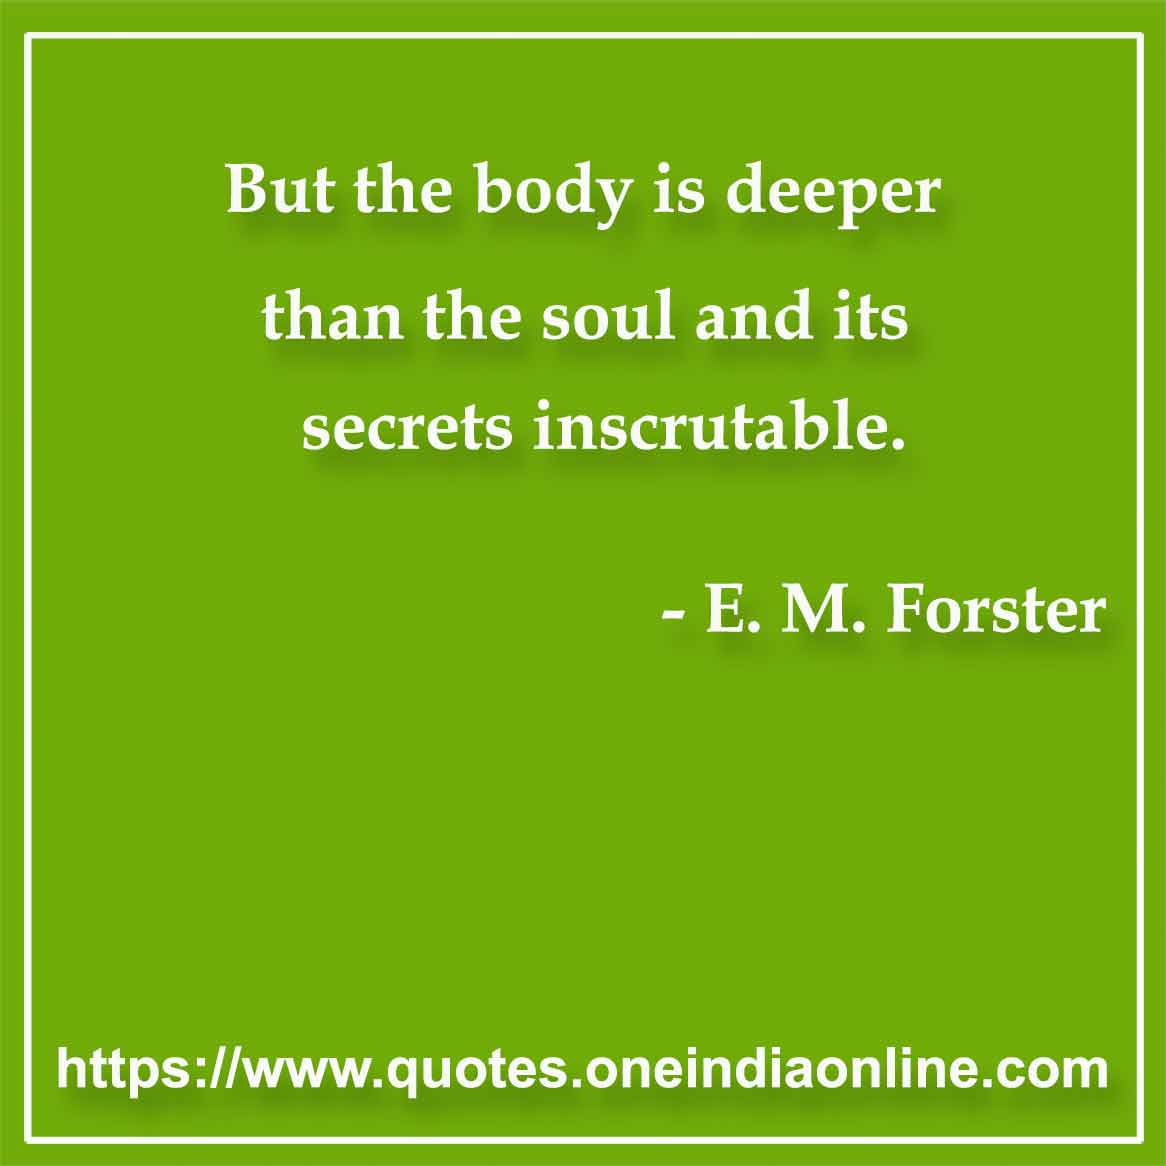 But the body is deeper than the soul and its secrets inscrutable.

- Body Quote by E. M. Forster